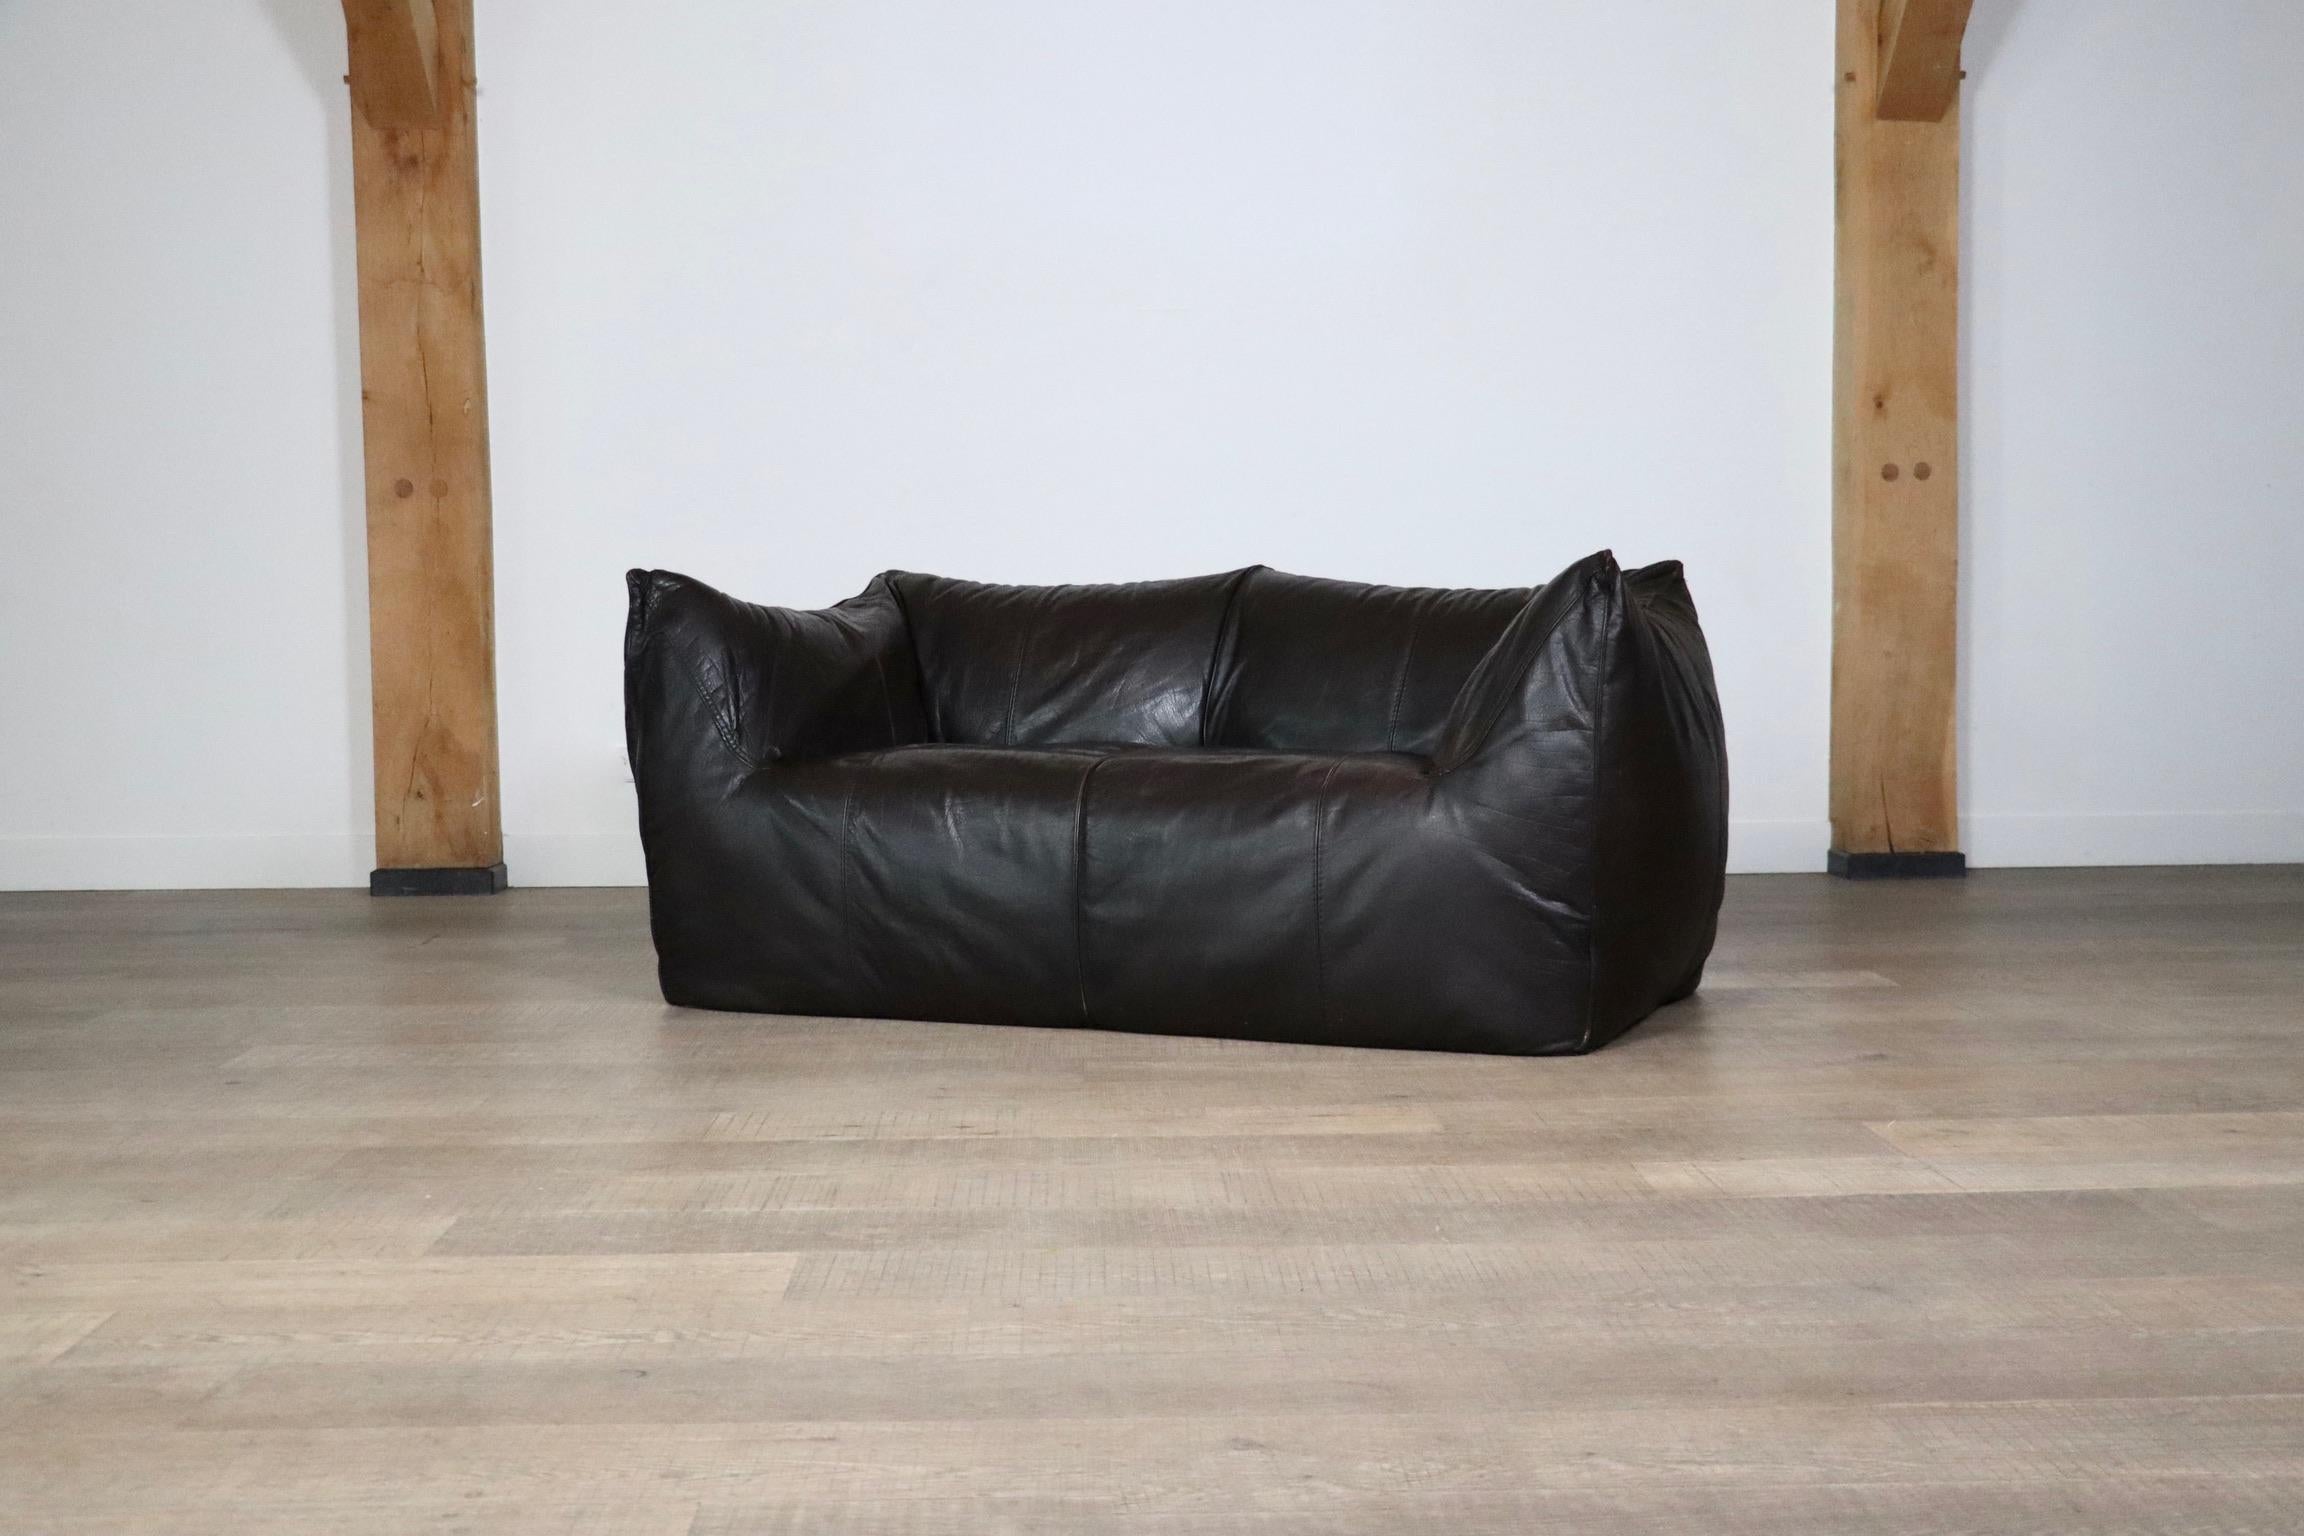 Stunning “Le Bambole” two seater sofa designed by Mario Bellini for B & B Italia in the 1970s. A beautiful edition in its original high quality dark brown leather with nice overall patina and a beautiful texture. Besides the outstanding comfort this